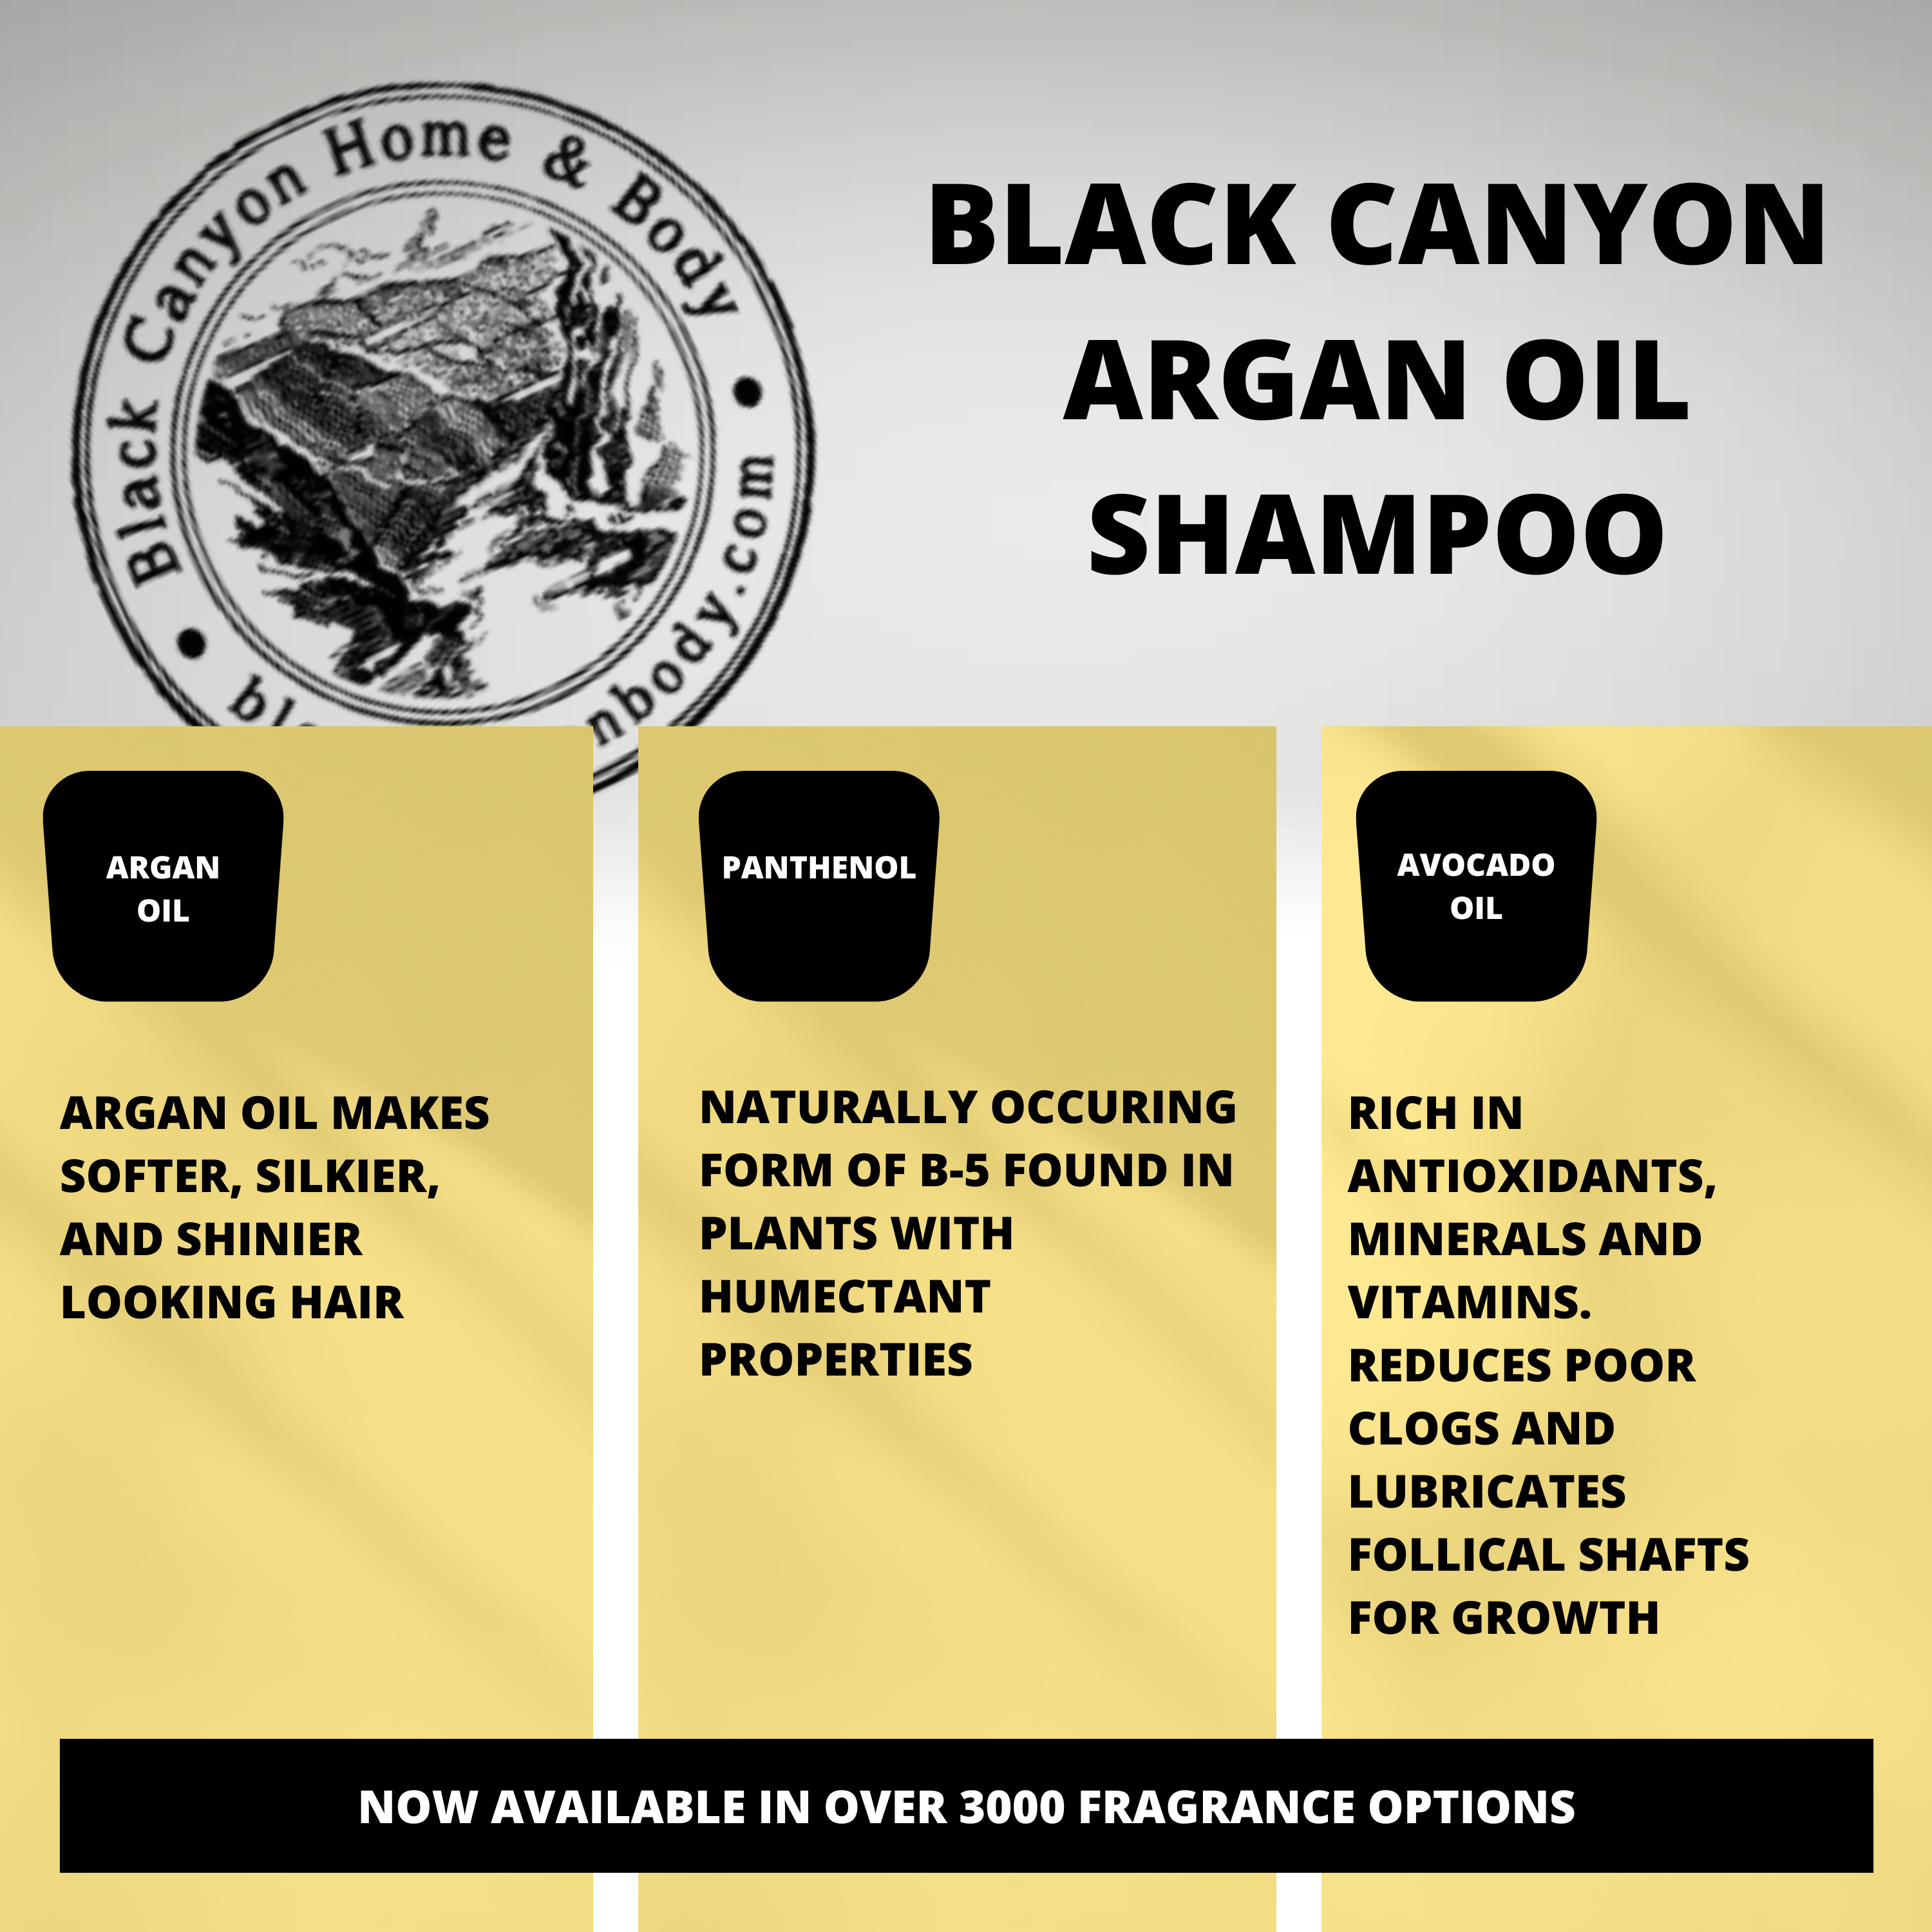 Black Canyon Vampires Breath Scented Shampoo with Argan Oil